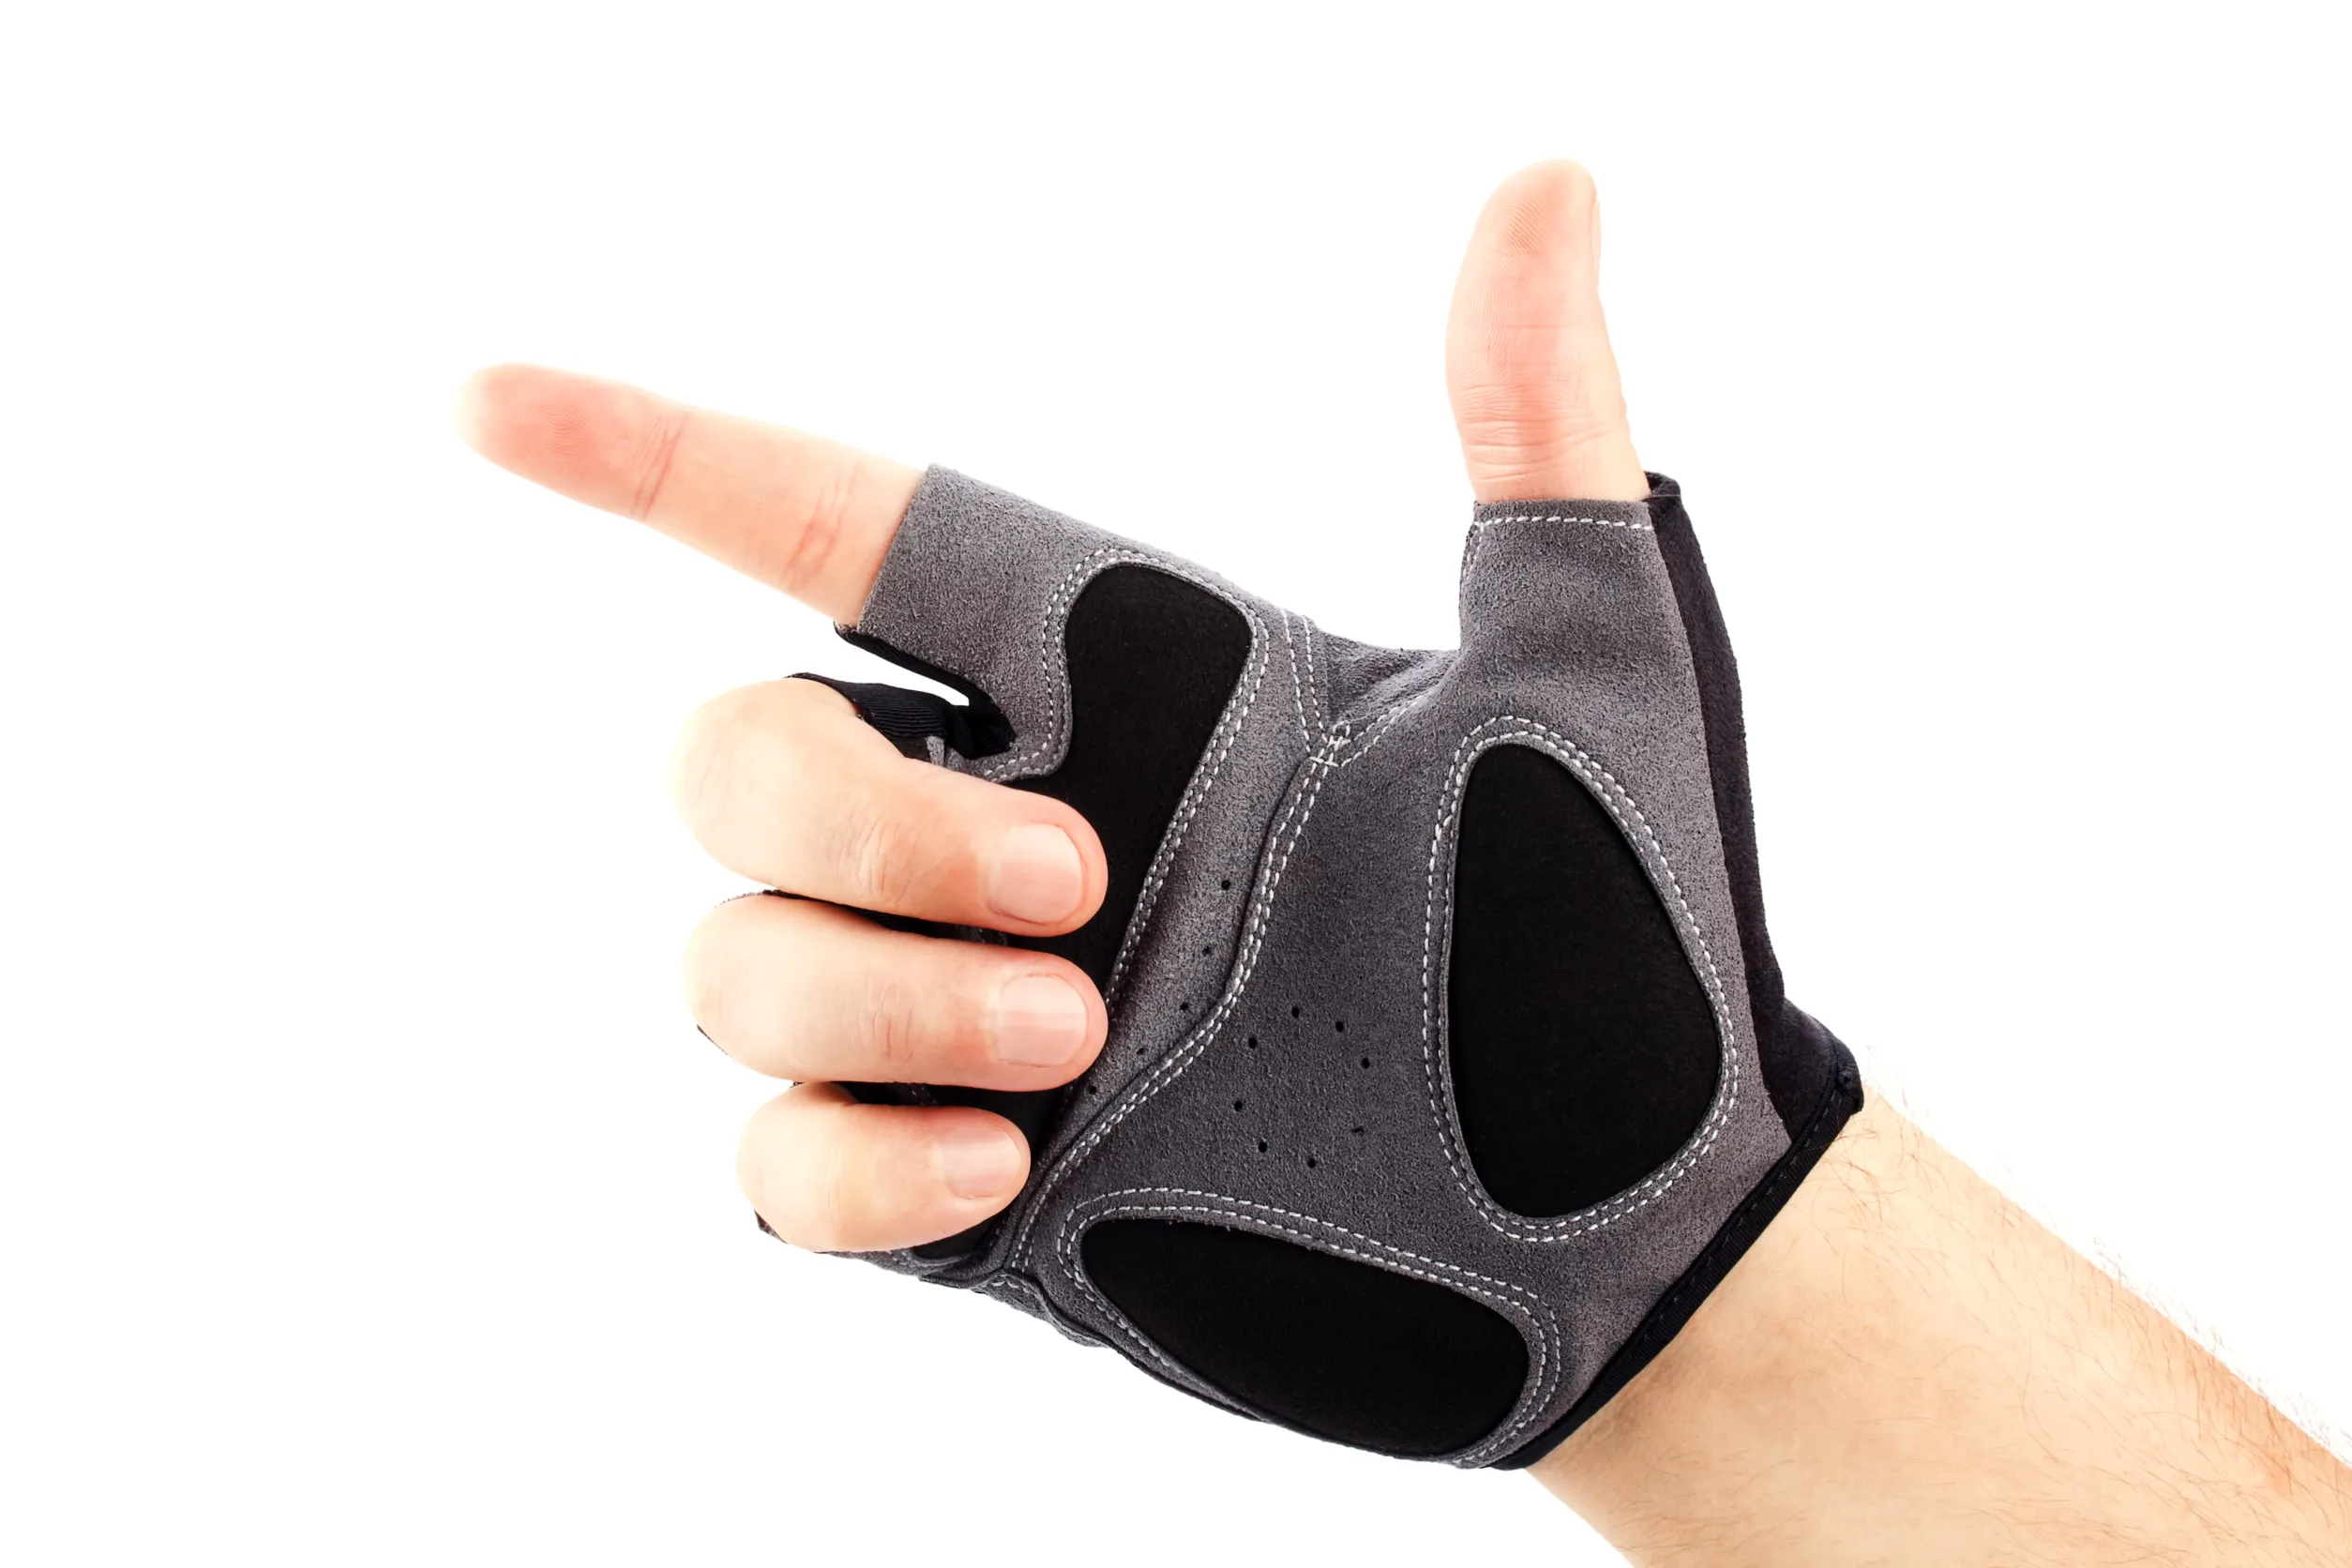 What Is The Benefit Of Wearing Cycling Glove?